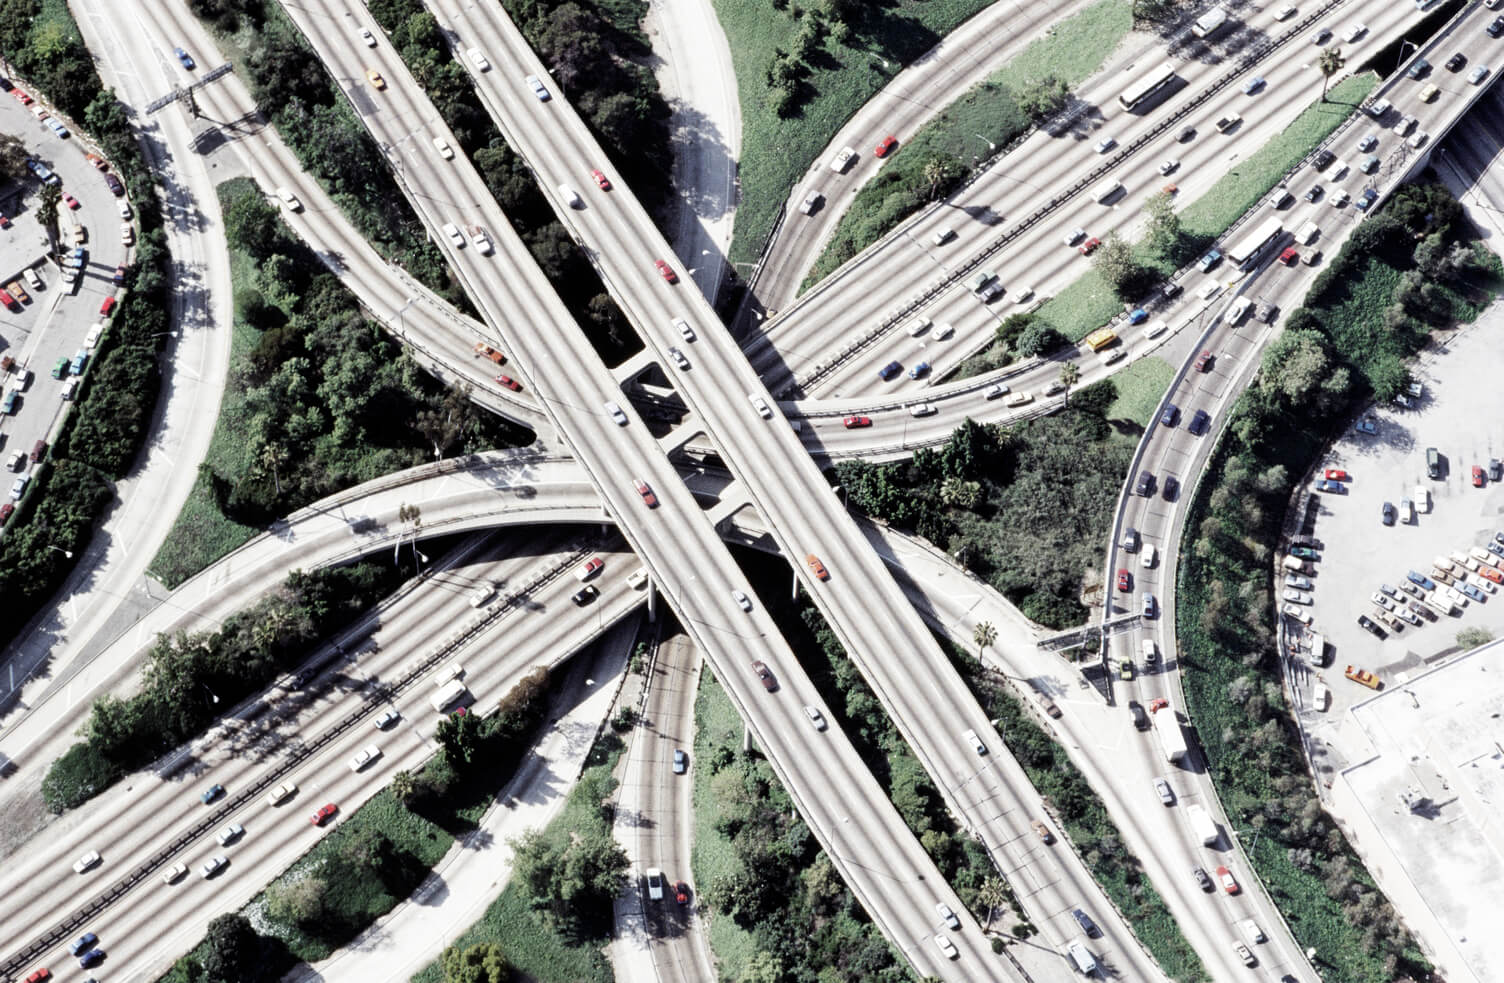 Freeway interchange from the sky.